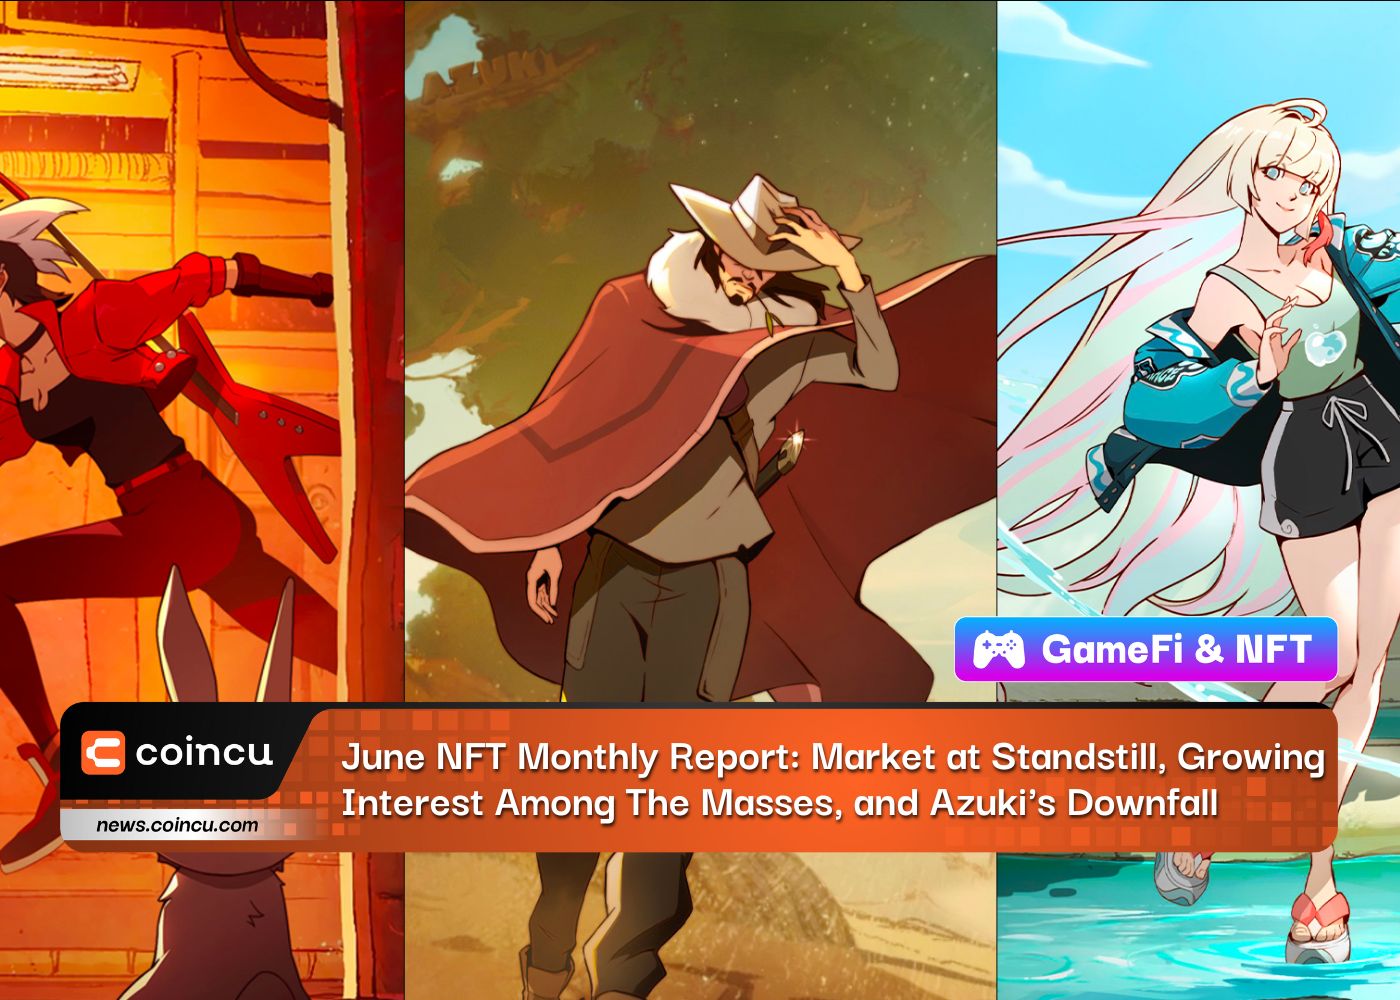 June NFT Monthly Report: Market at Standstill, Growing Interest Among The Masses, and Azuki’s Downfall